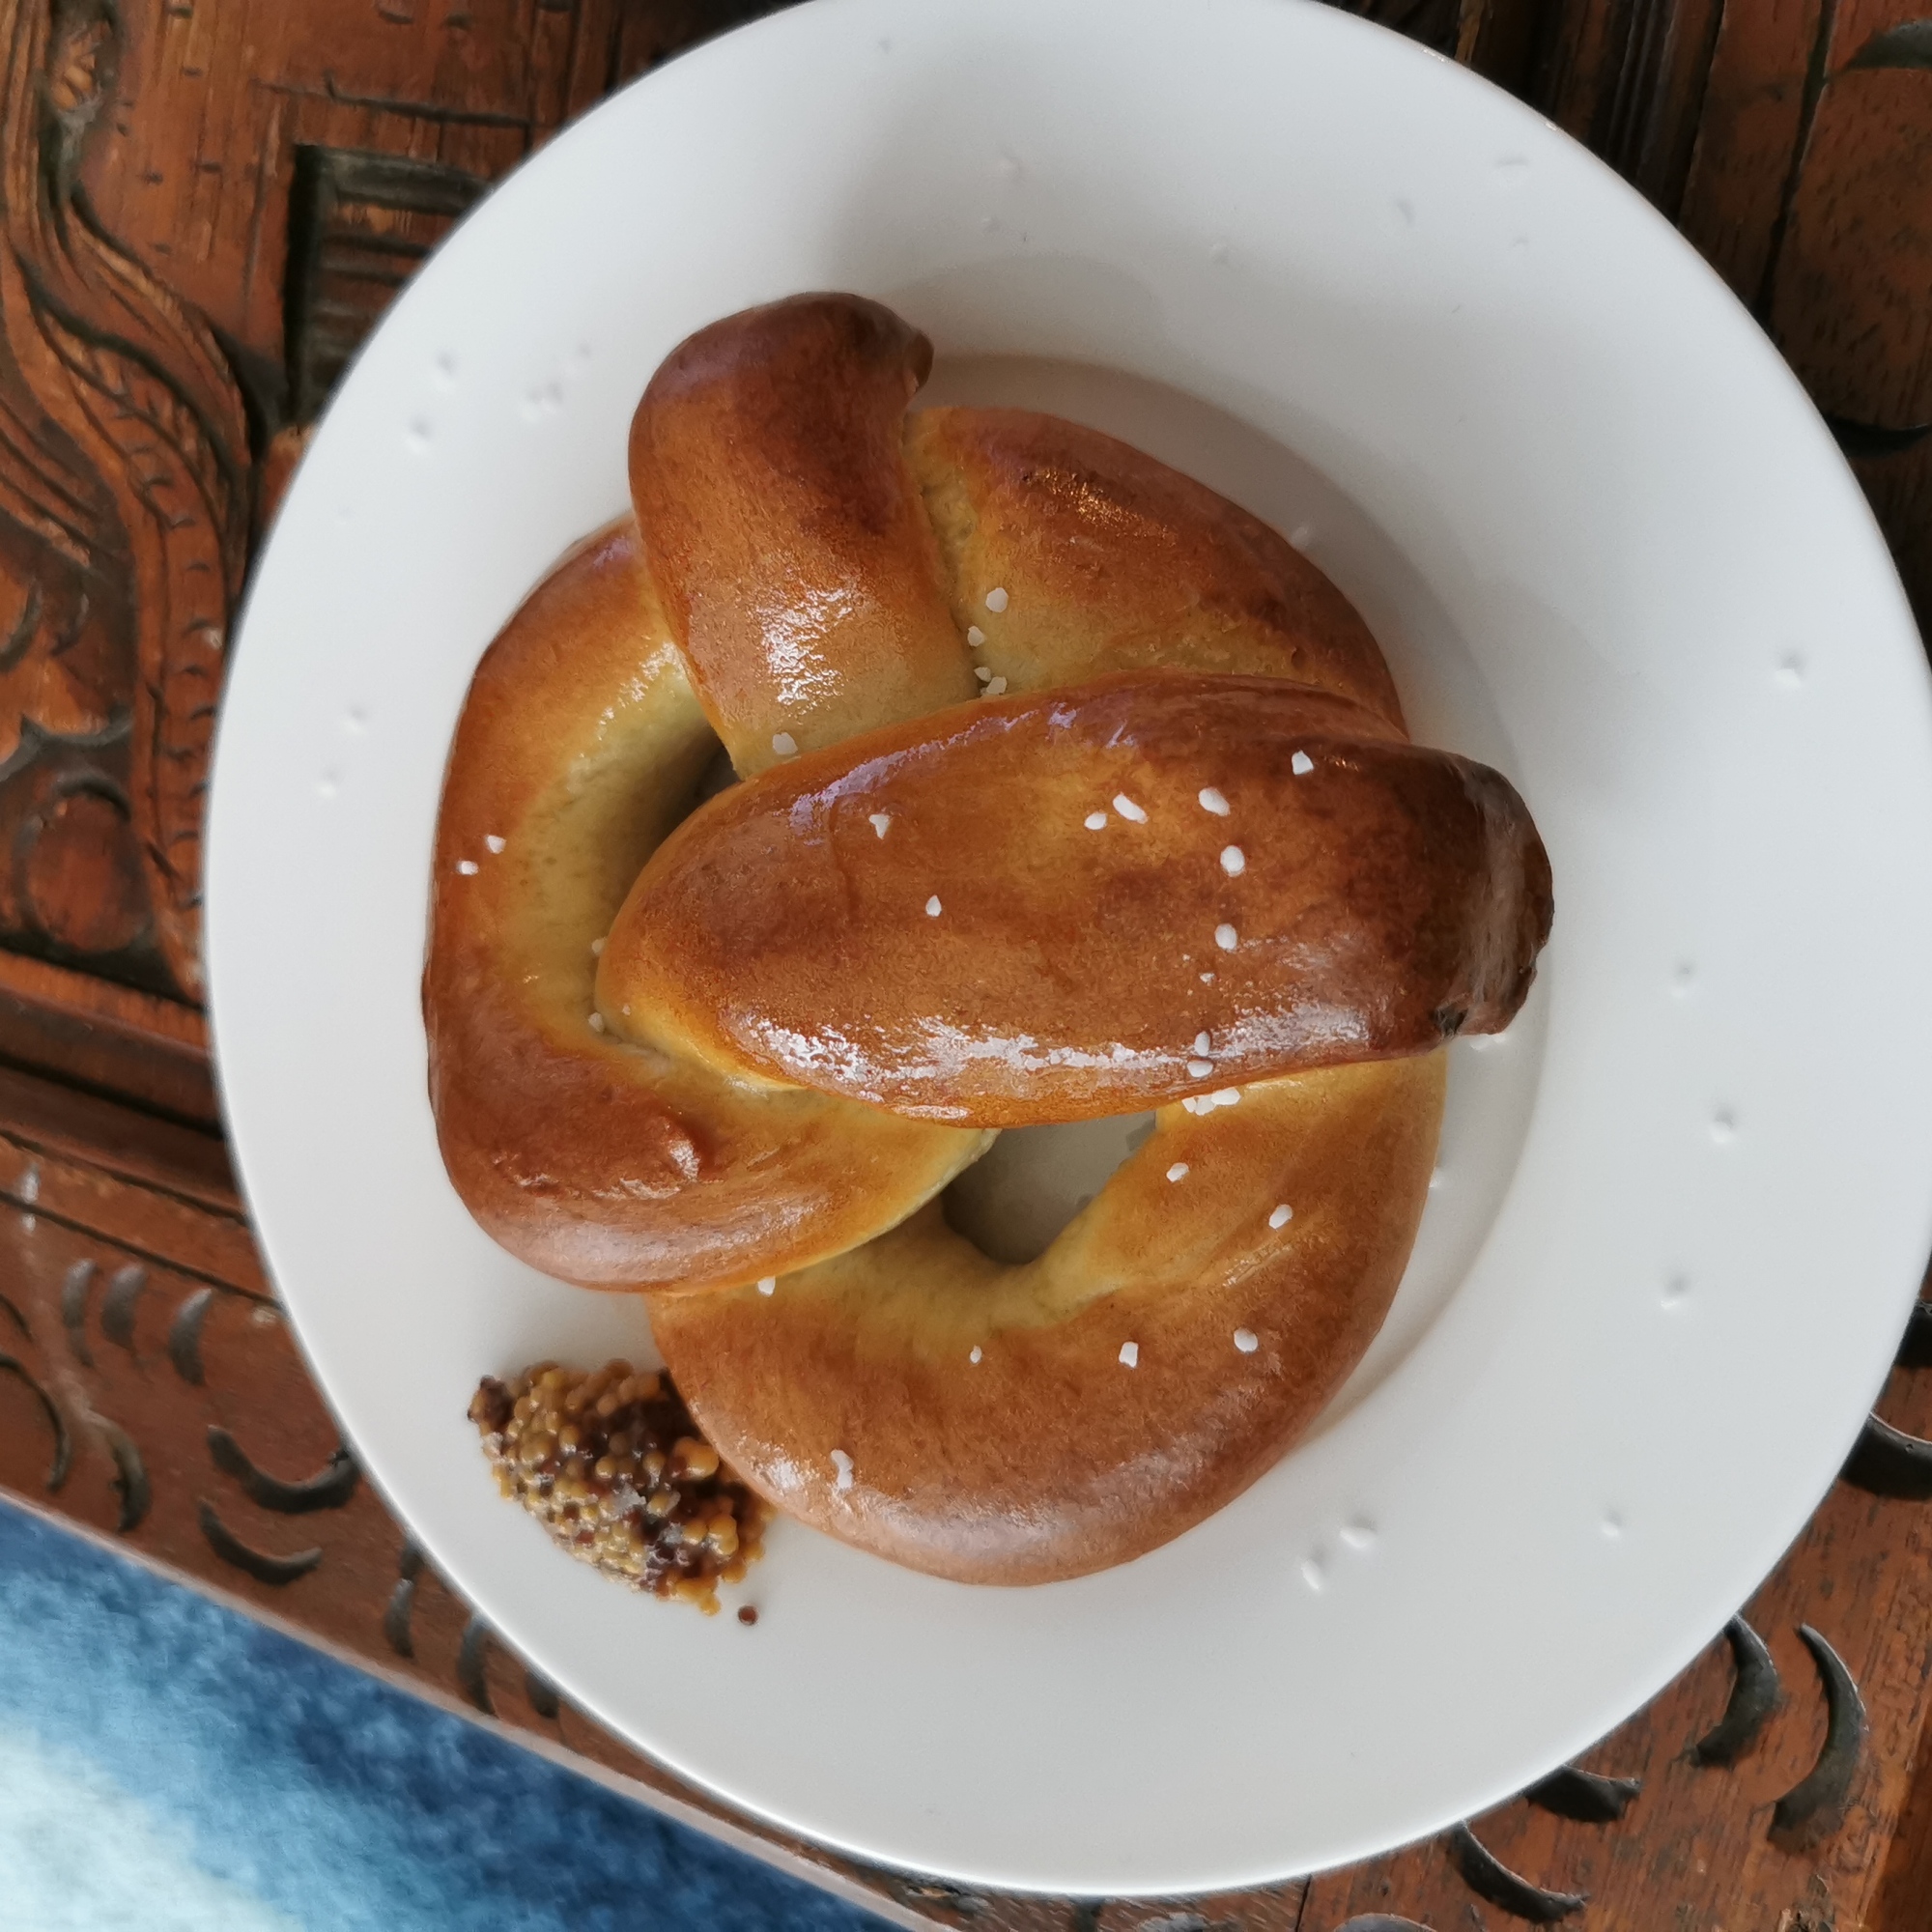 Freshly baked soft pretzel sits on a white plate with a dollop of seeded mustard